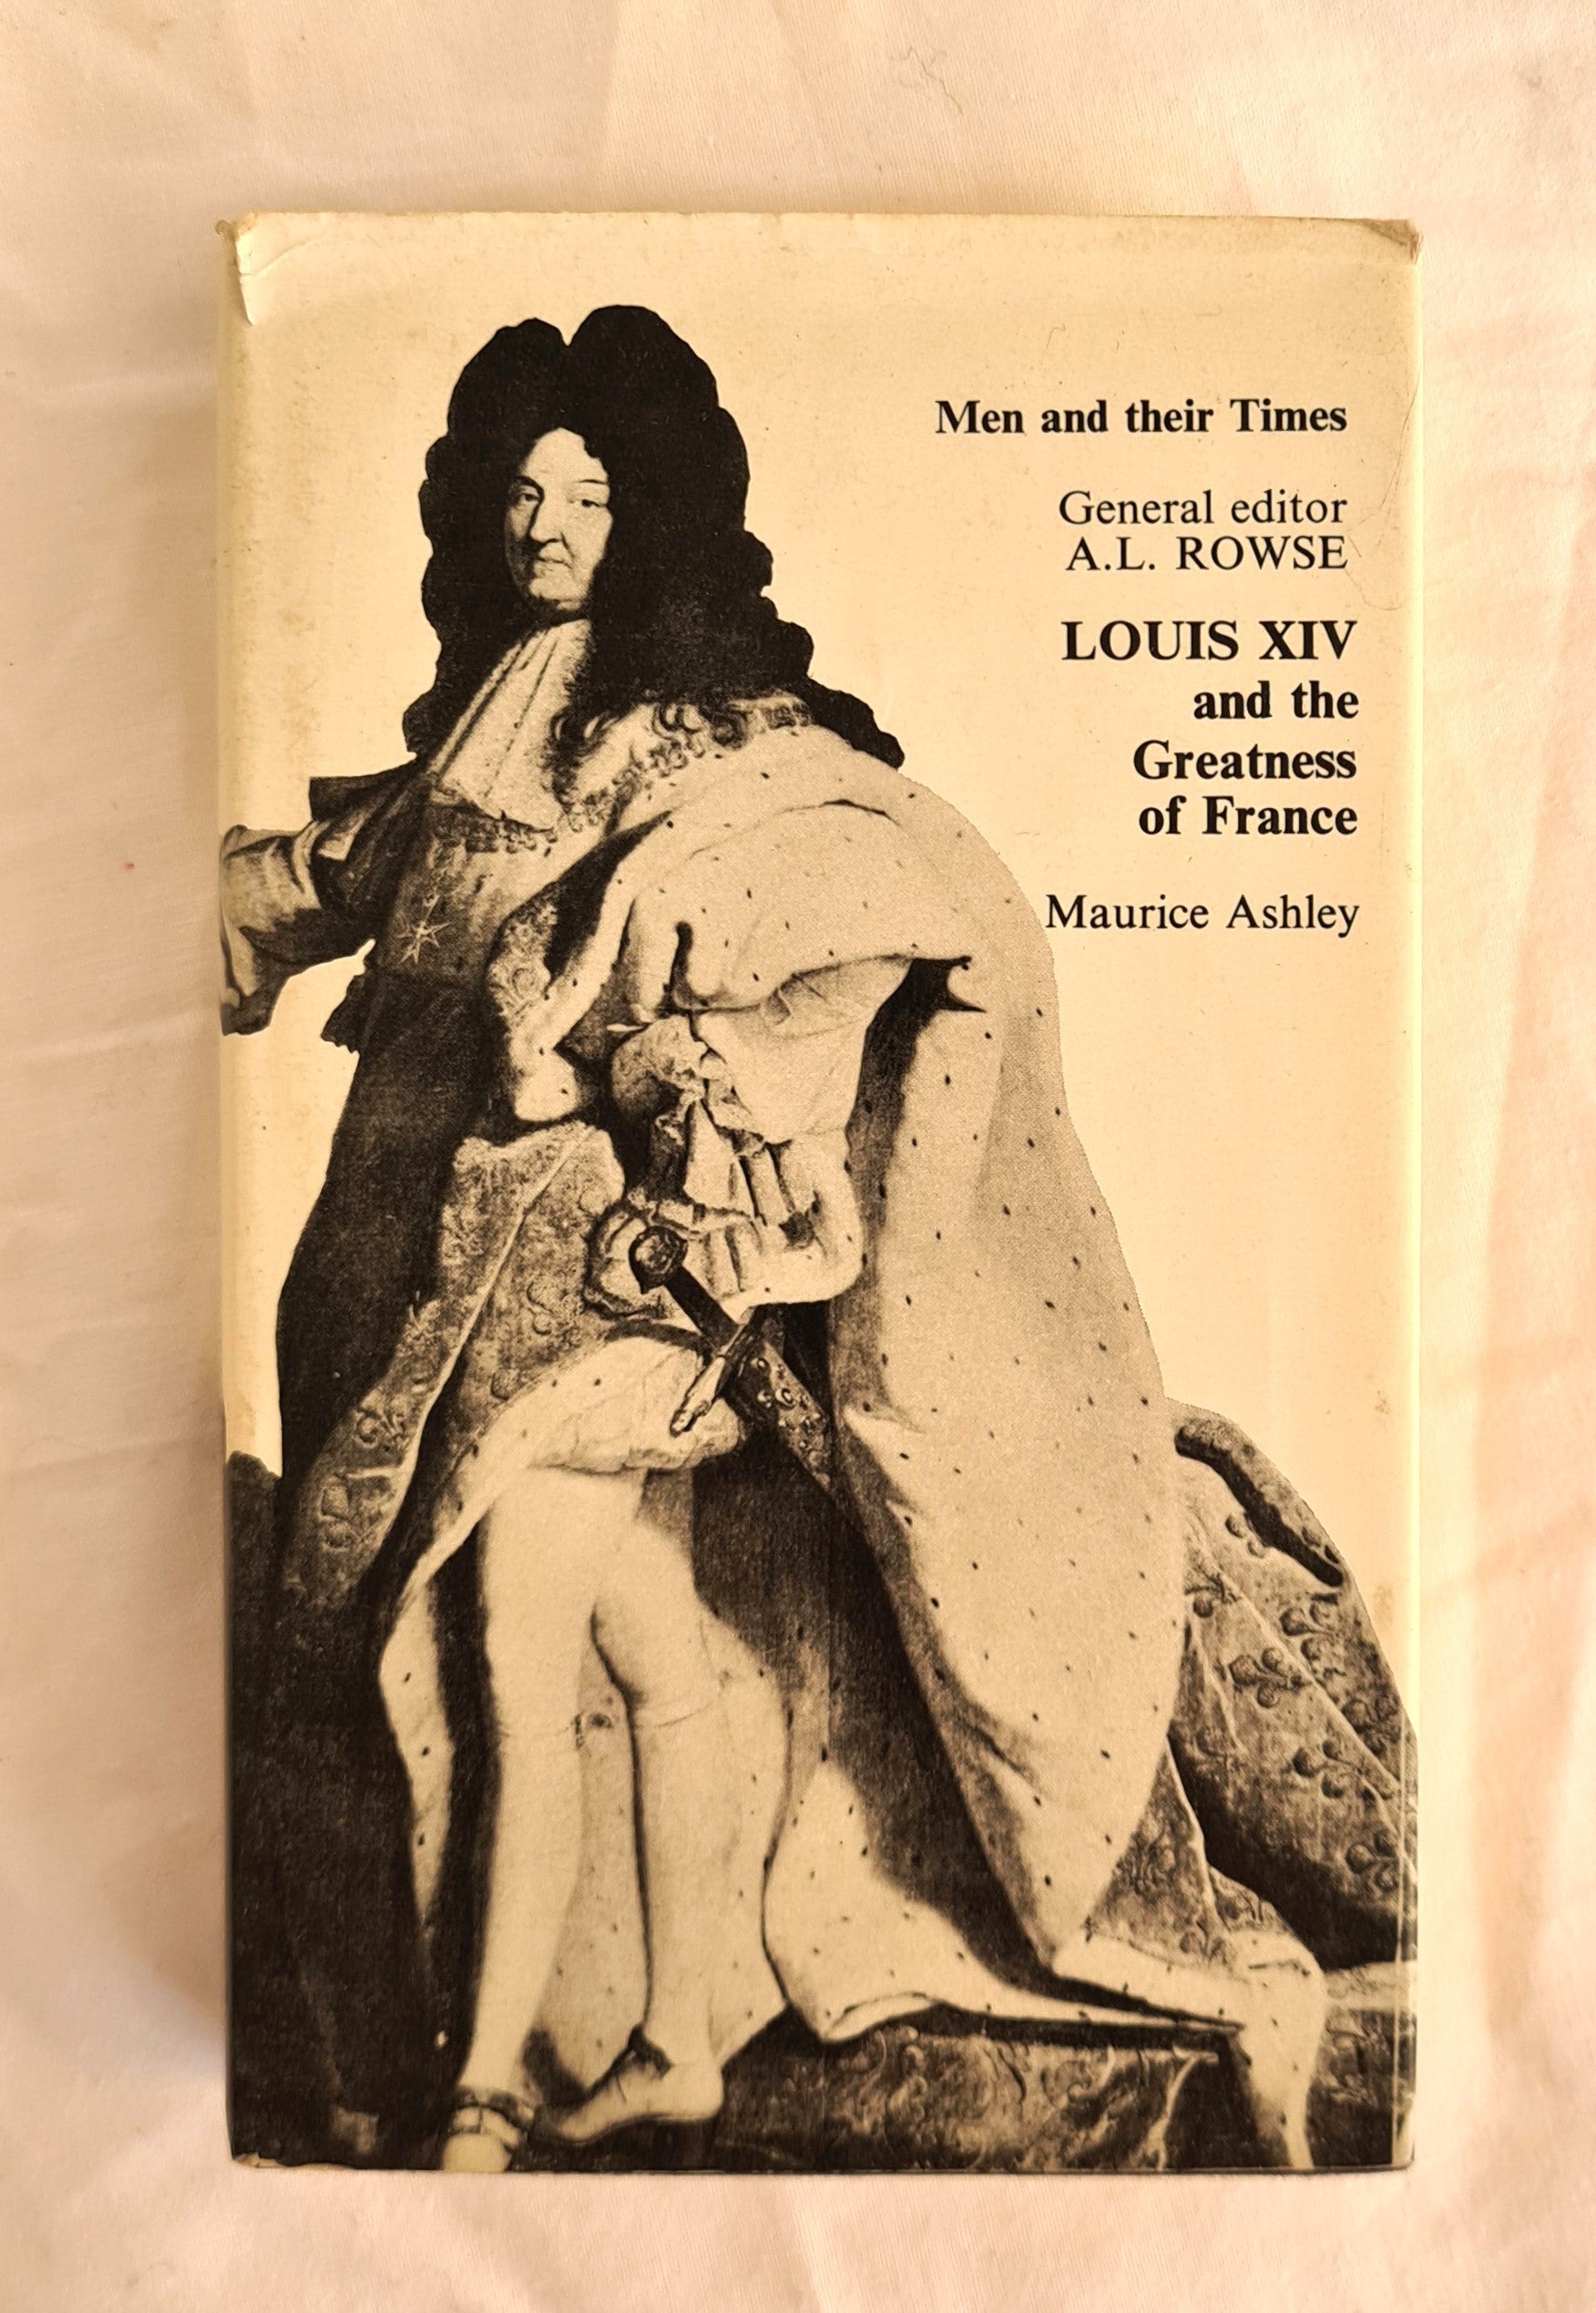 Louis XIV and the Greatness of France  by Maurice Ashley  Men and Their Times  General Editor A.L. Rowse